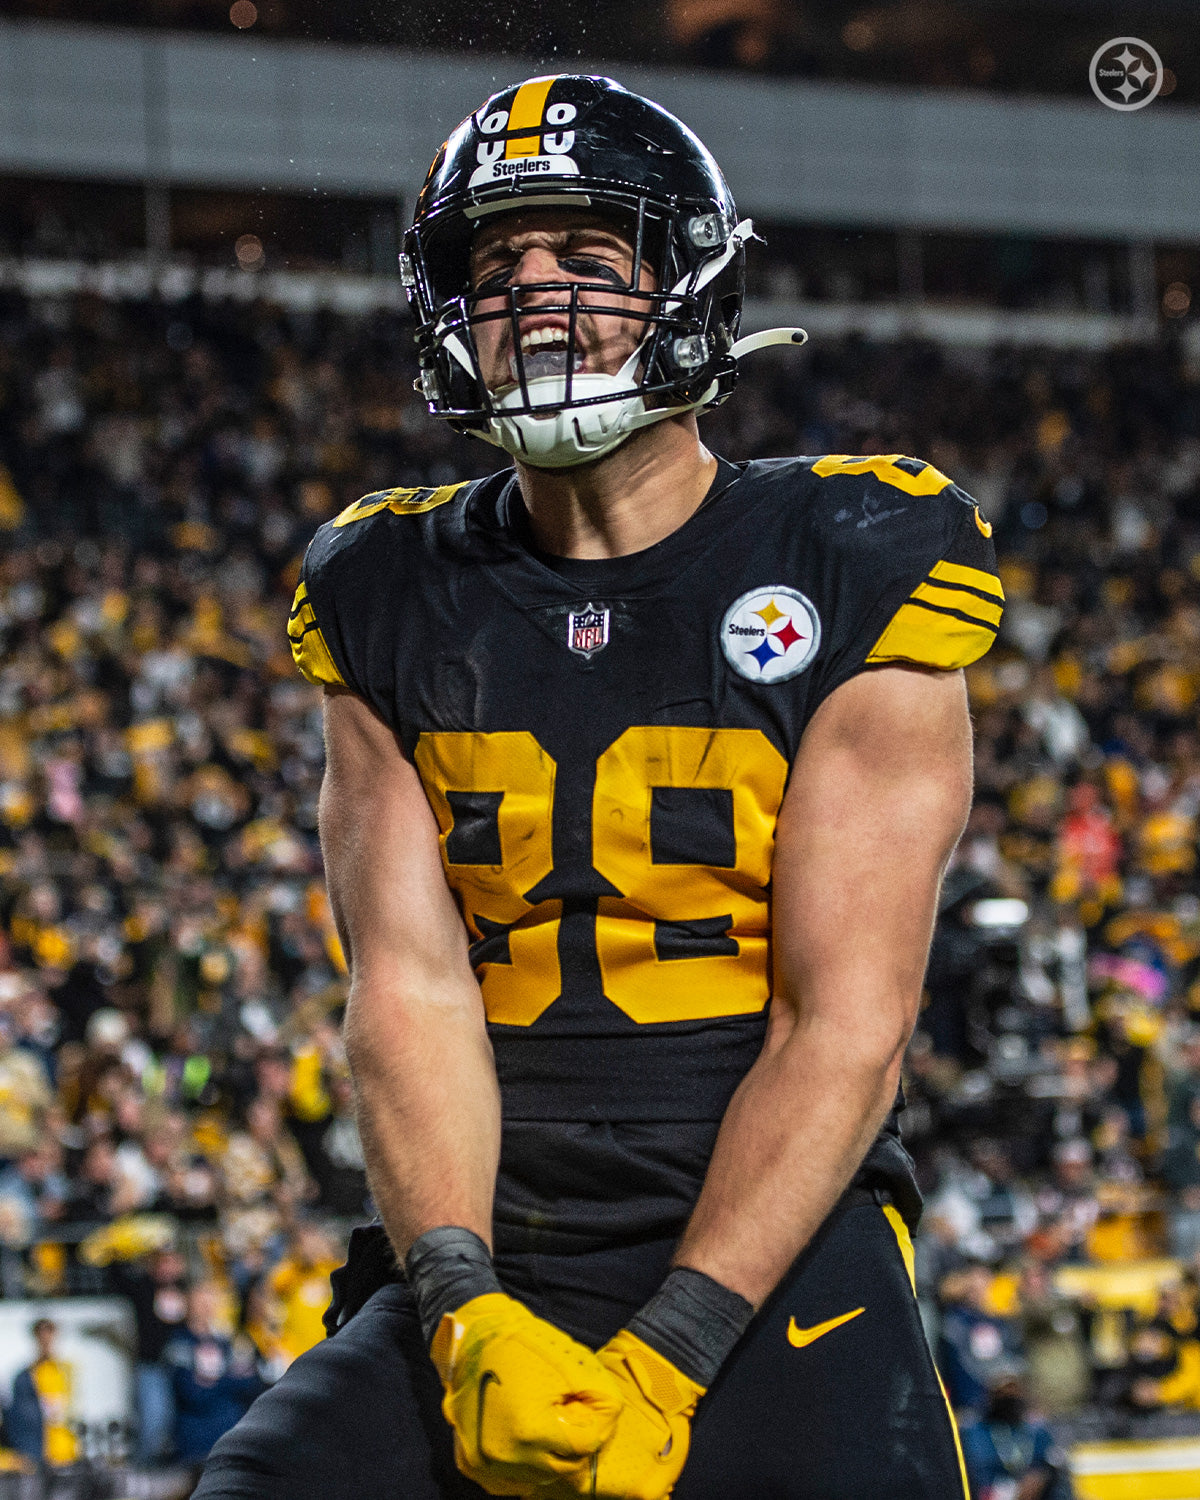 Steelers Color Rush Uniforms Are Coming This Weekend